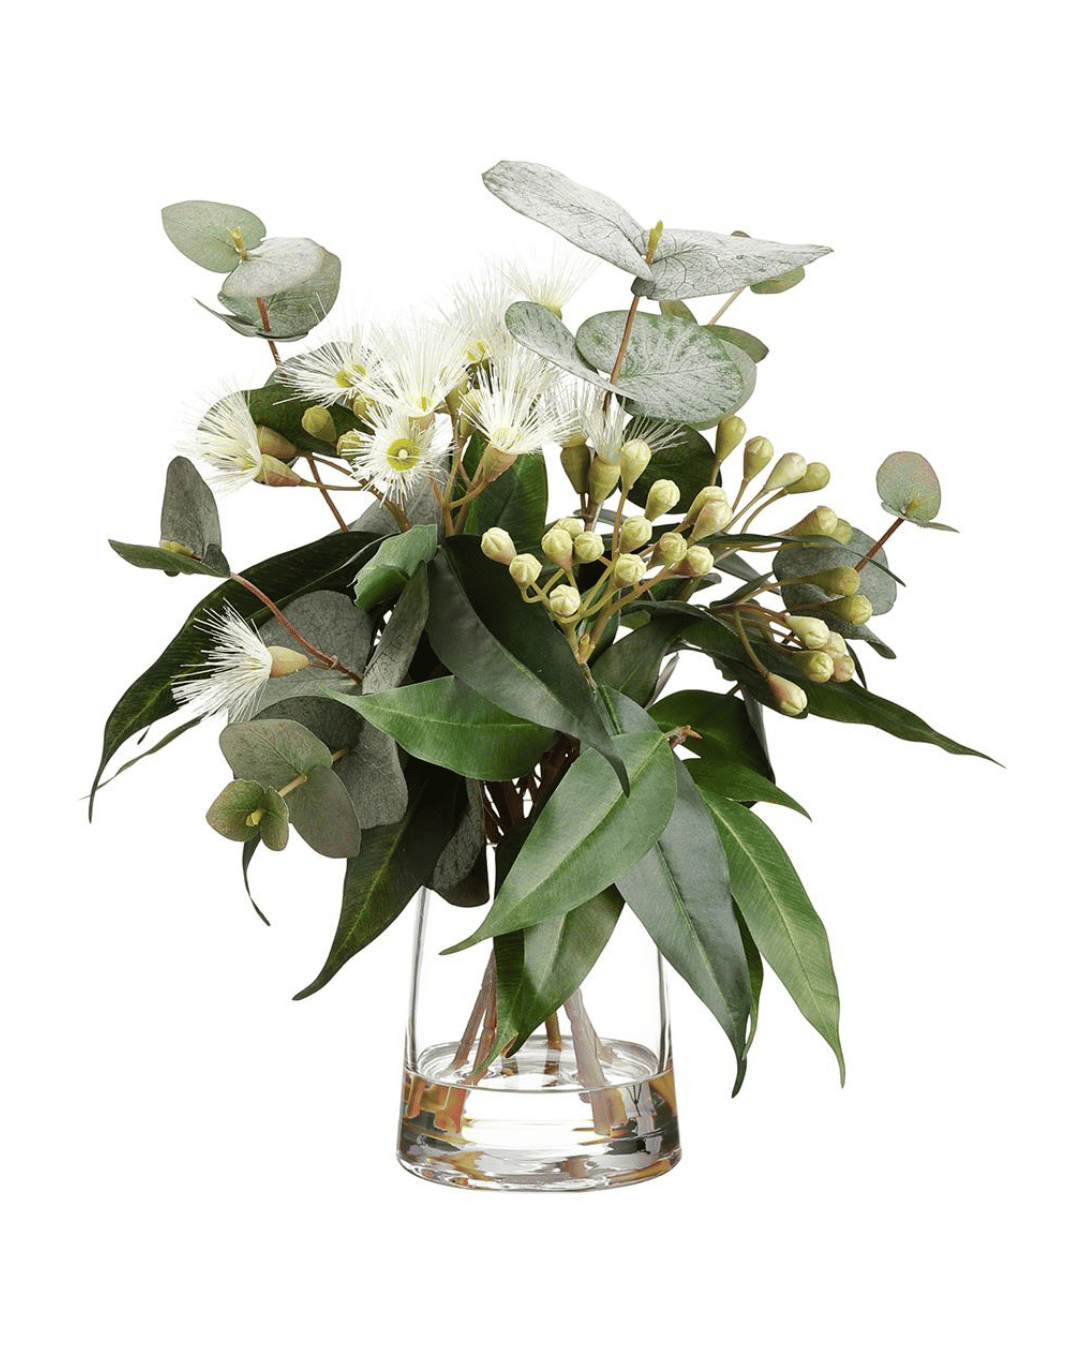 A vibrant arrangement of the AllState Floral And Craft 14" Eucalyptus in Glass Vase, isolated on a white background, perfect for a Scottsdale Arizona bungalow.